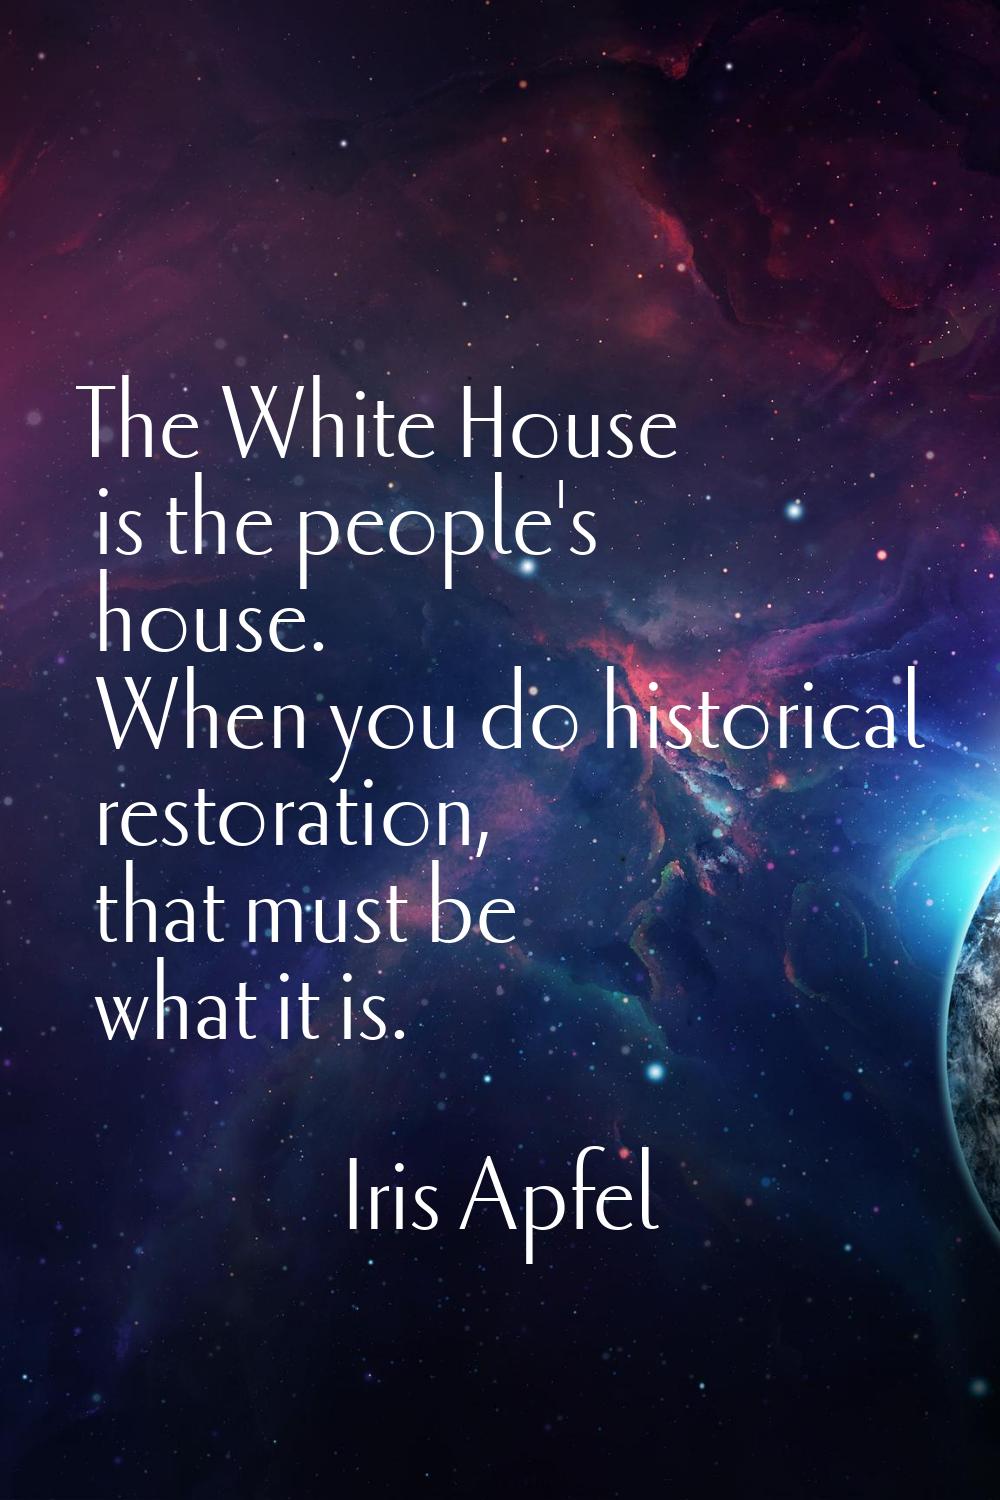 The White House is the people's house. When you do historical restoration, that must be what it is.